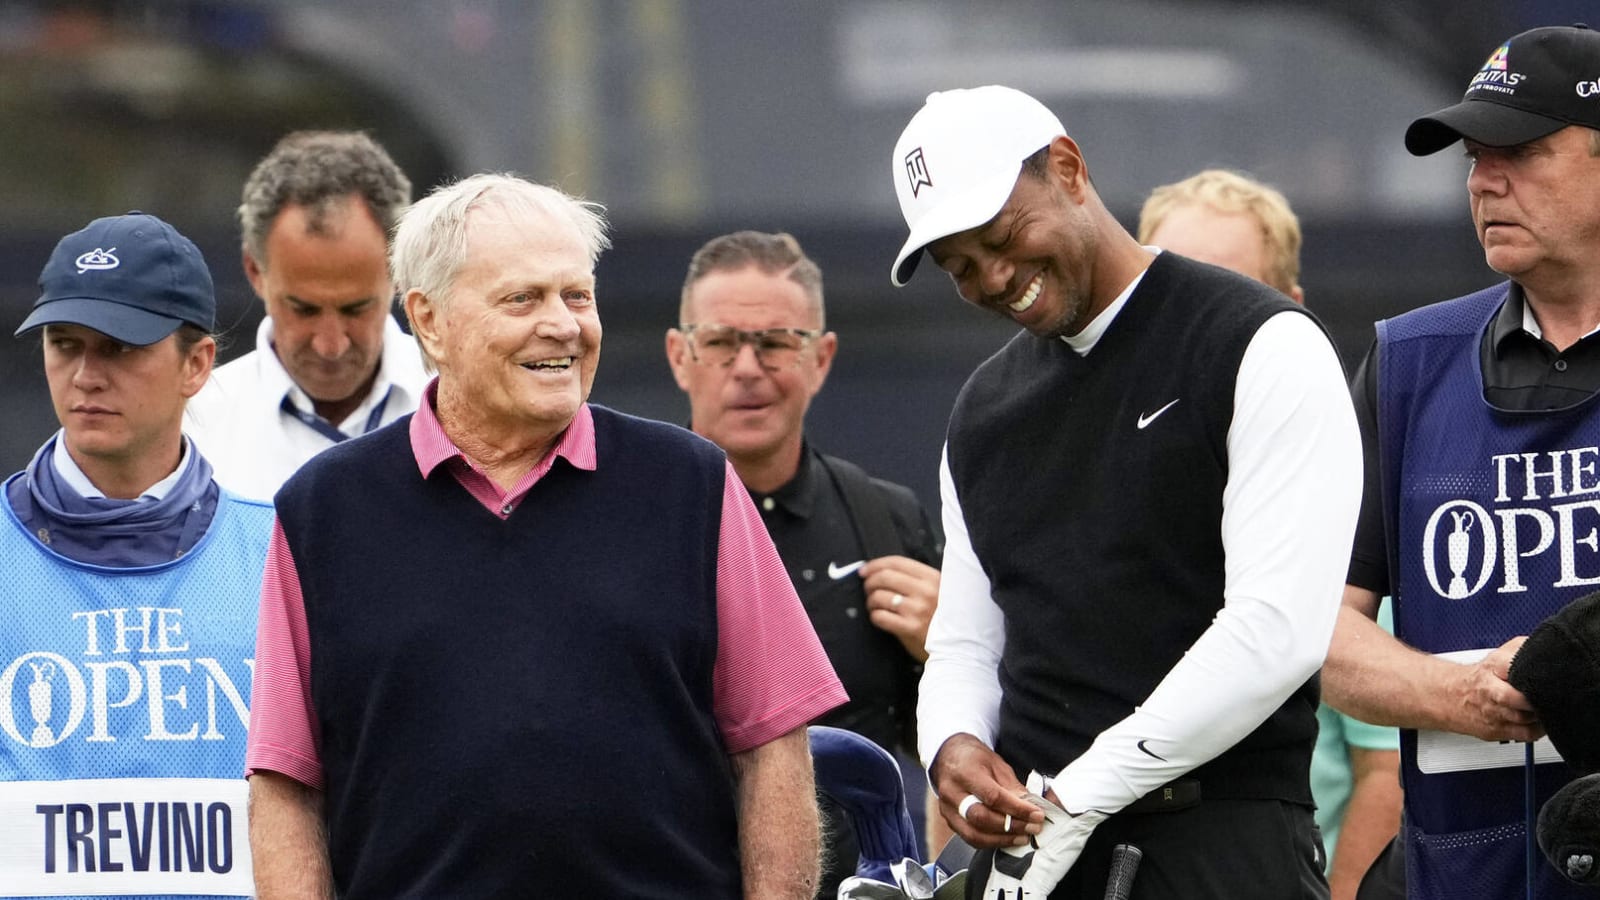 Jack Nicklaus boldly claims Tiger Woods will NOT SURPASS his majors wins record following recent injuries